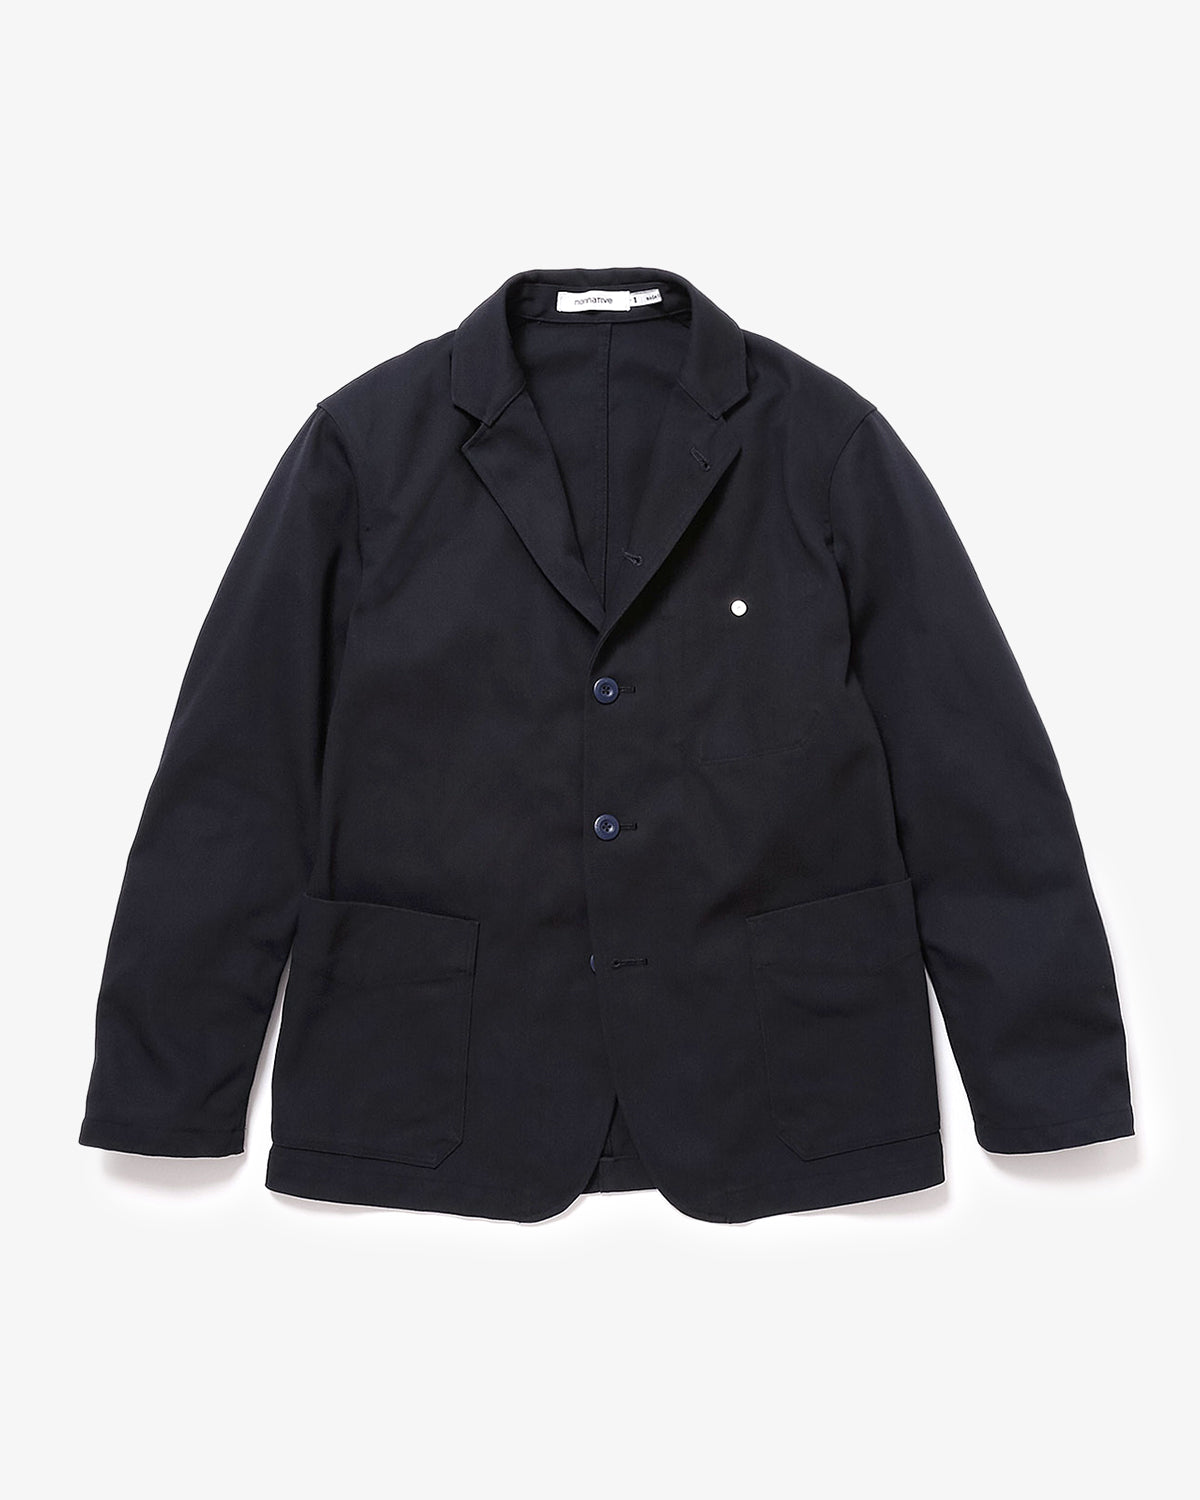 WORKER 5B JACKET COTTON HIGH TWISTED TWILL